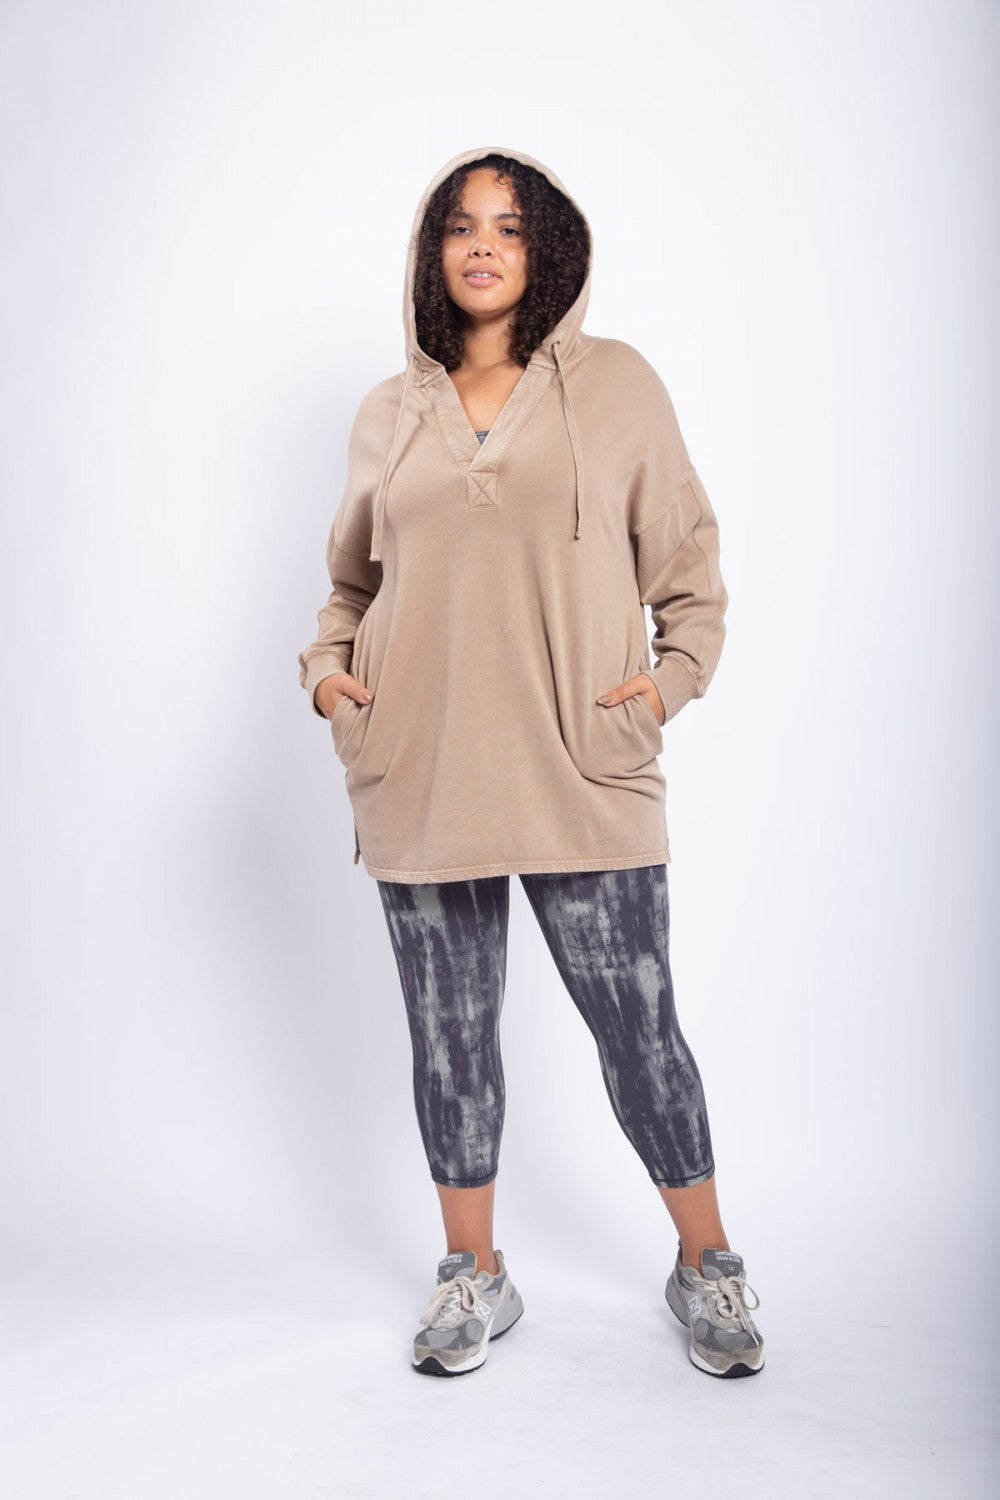 PLUS Mineral Washed Pullover